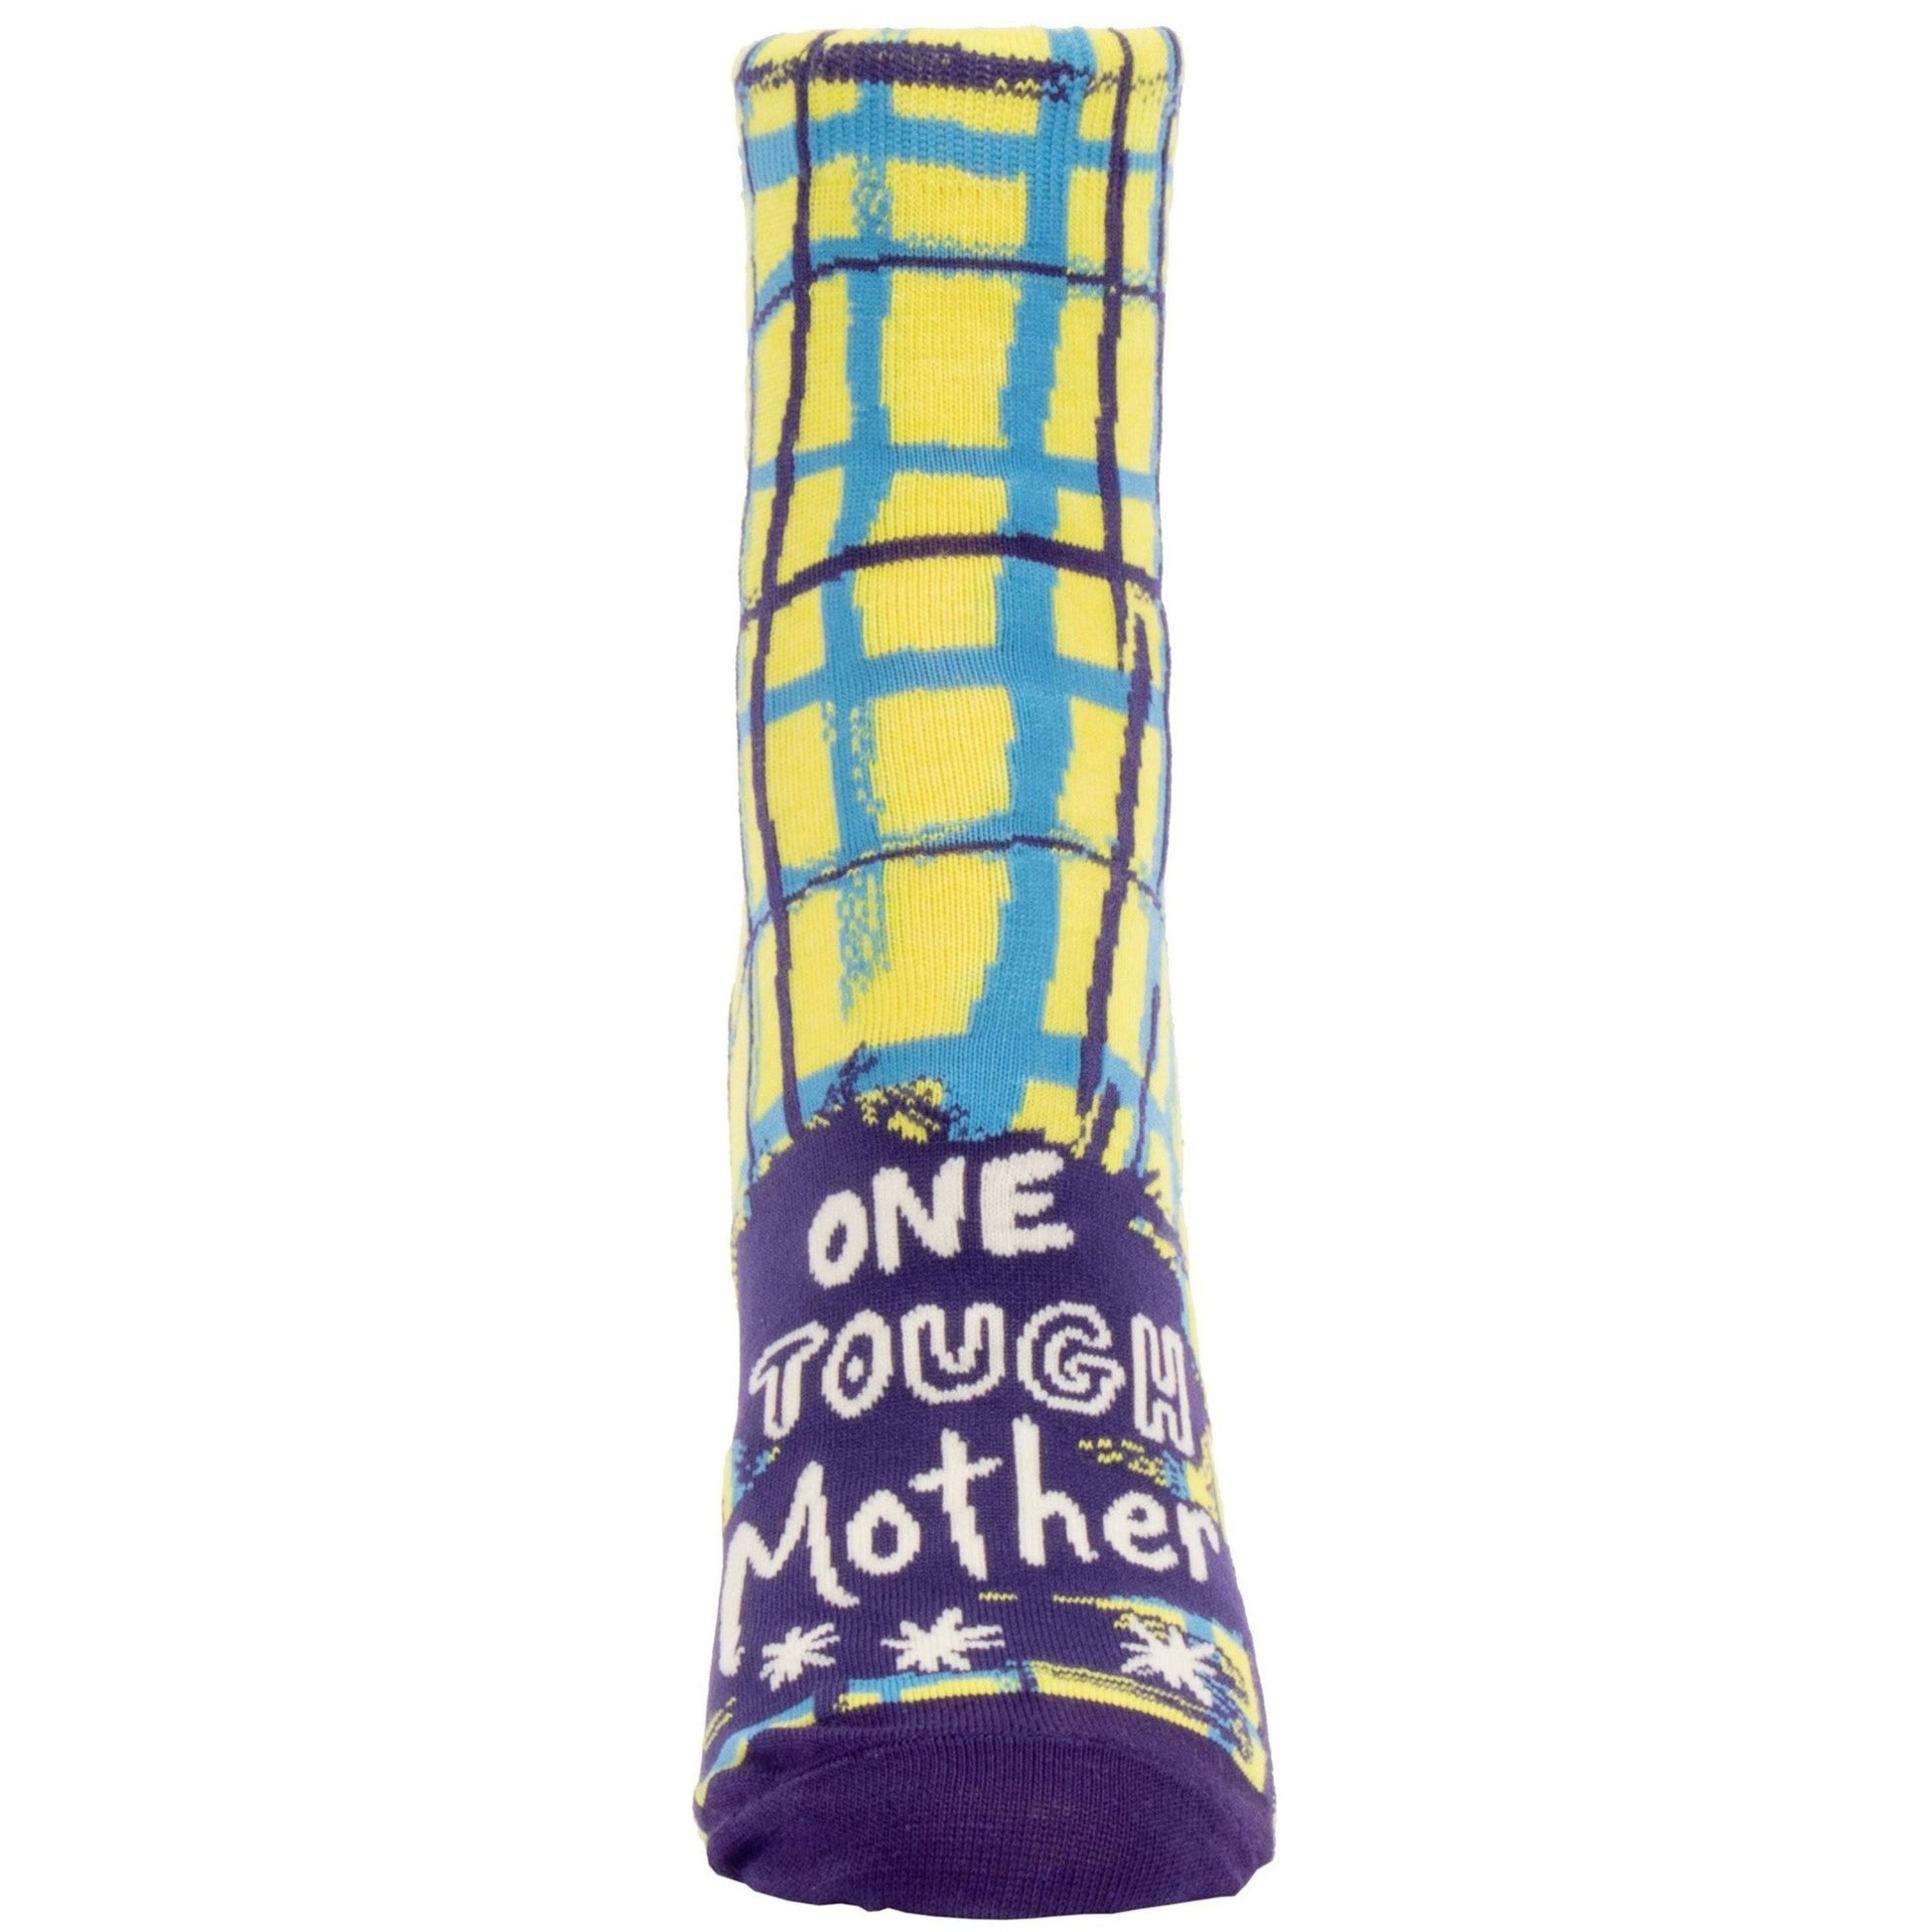 One Tough Mother Women's Ankle Socks